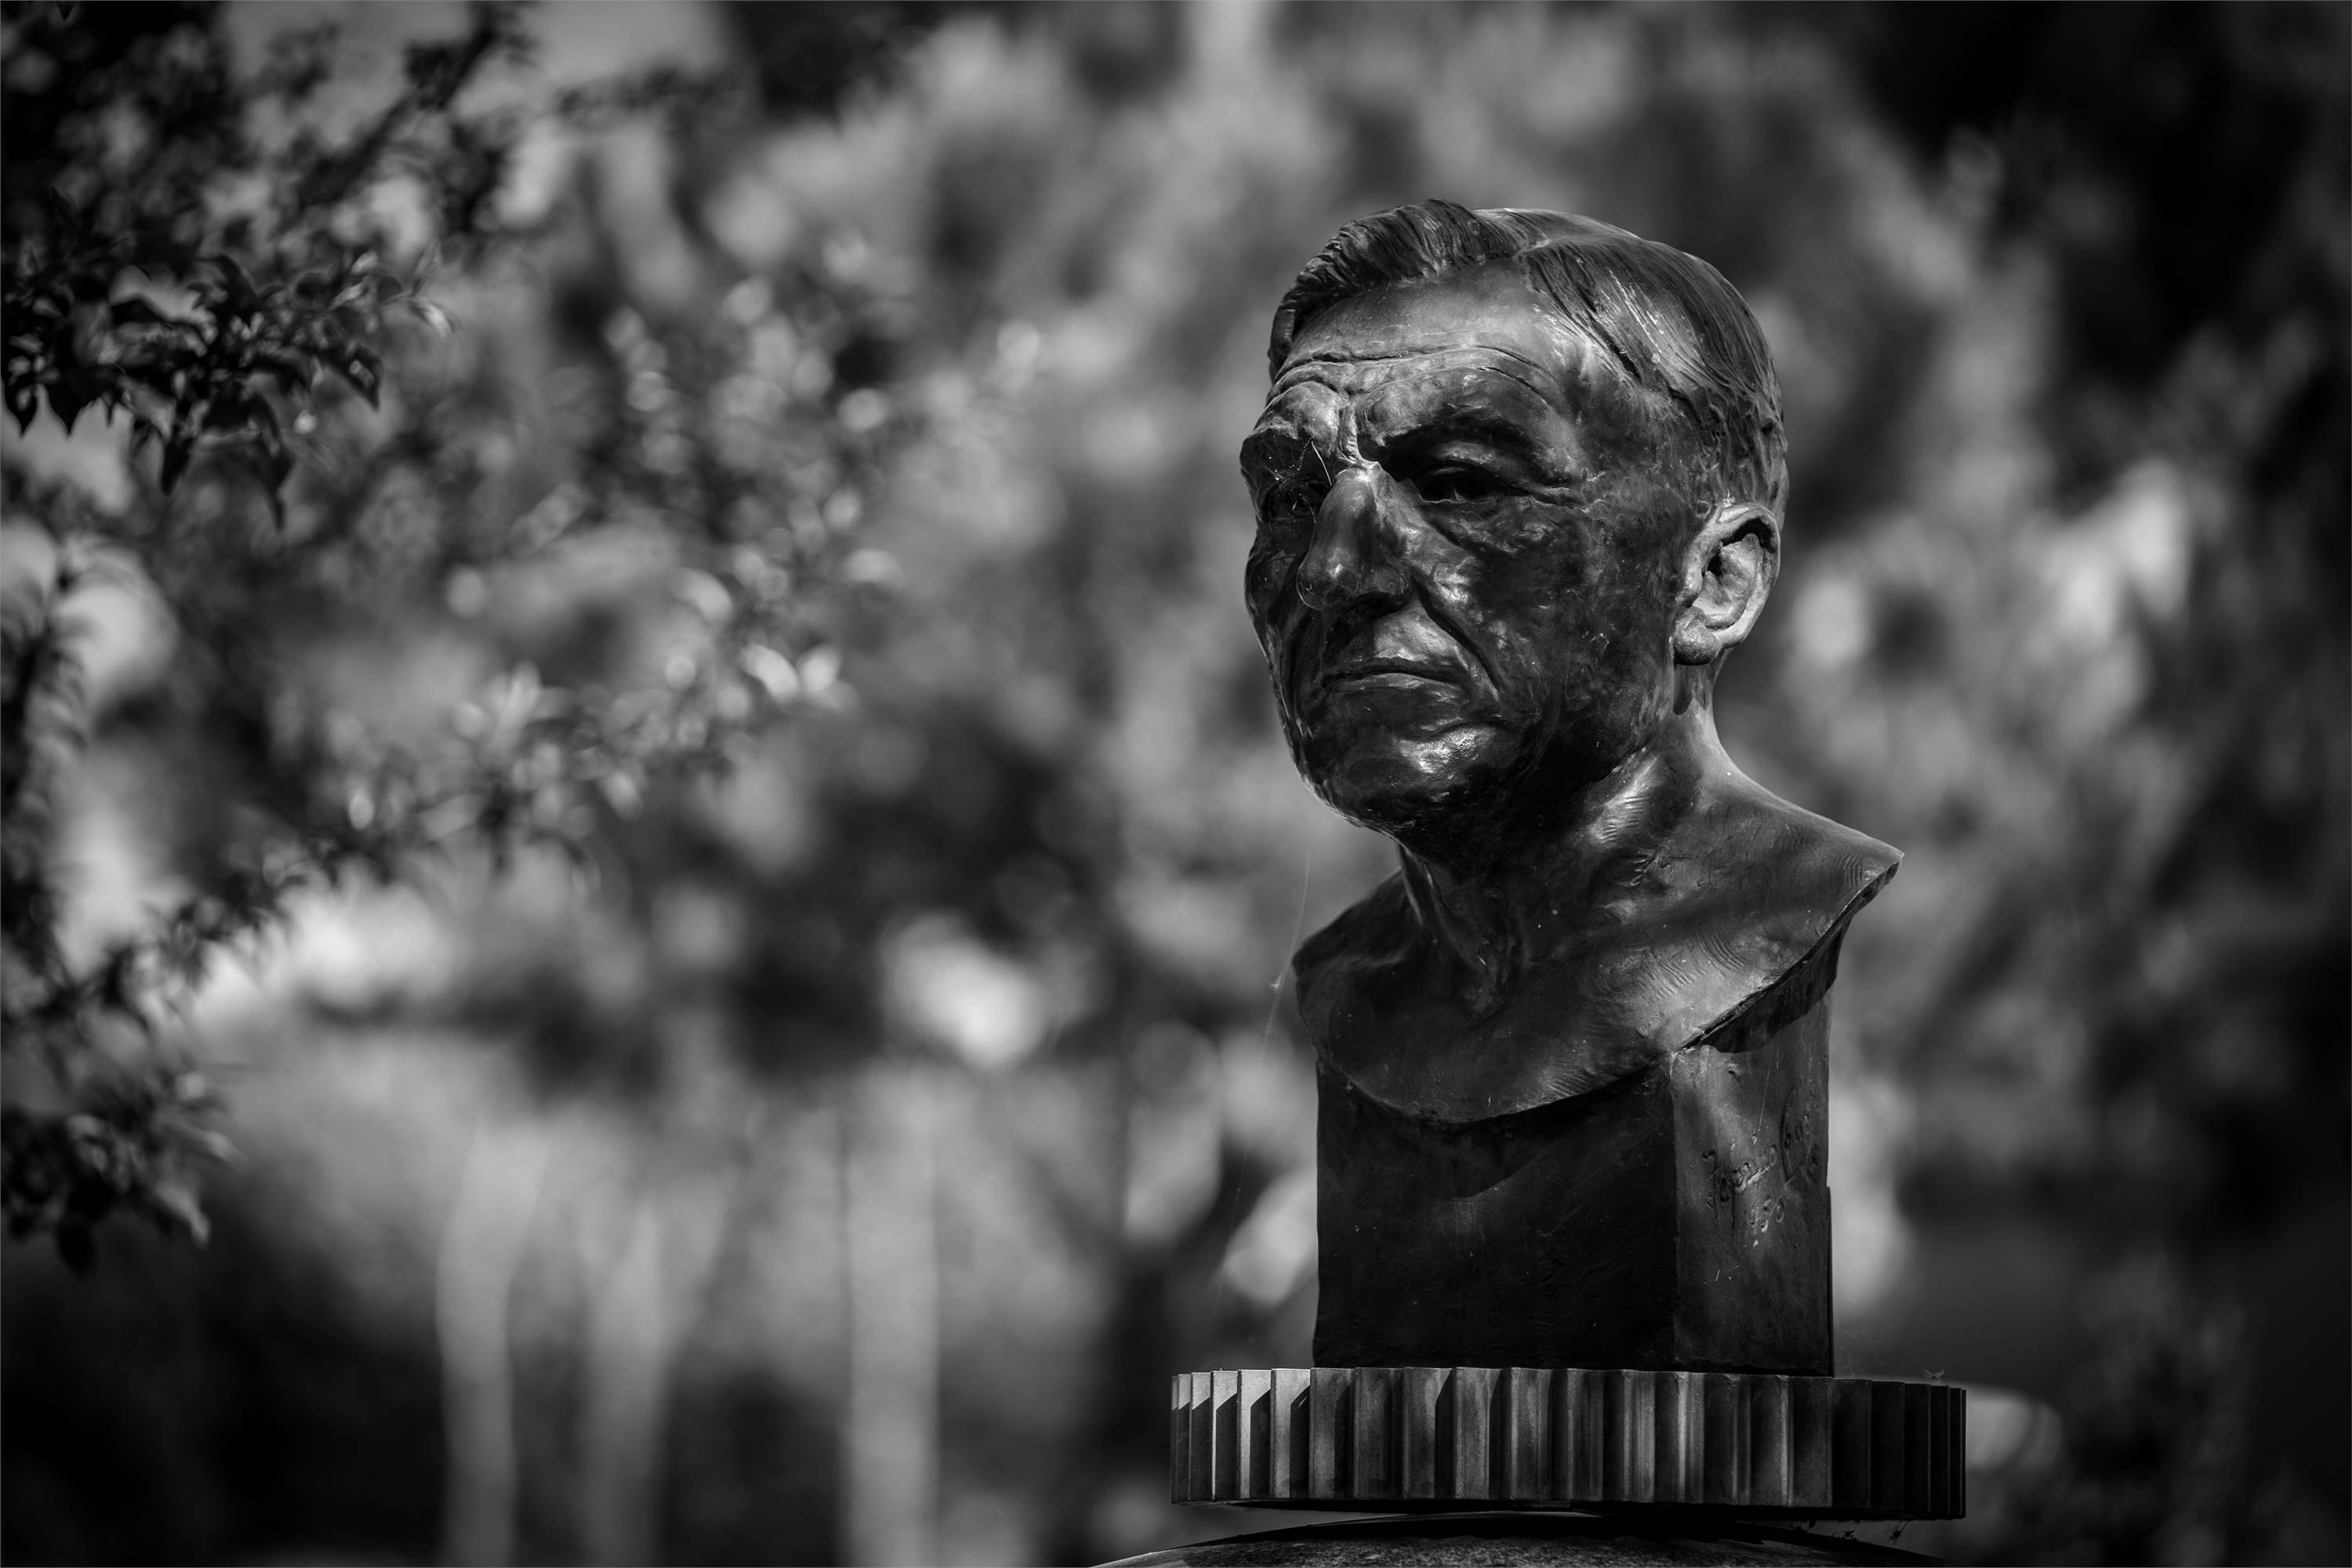 António Gomes do Vale Peixoto (1890-1958), better known as Pachancho, was an industrialist from Braga, known for his innovative and avant-garde spirit, responsible for the creation of the Pachancho Factory in 1920, a precursor in the engine industry in Portugal. The bust, in bronze, was designed by sculptor António Peixoto in 1950, at the request of the workers to present the industrialist in 1953, and the family offered it to the city when the new Pachancho Square was inaugurated in 2015.  It represents the honouree on the cogwheel of an engine, which allows the bust to rotate in all directions. It rests on a cylindrical granite pedestal that contains an inscription.